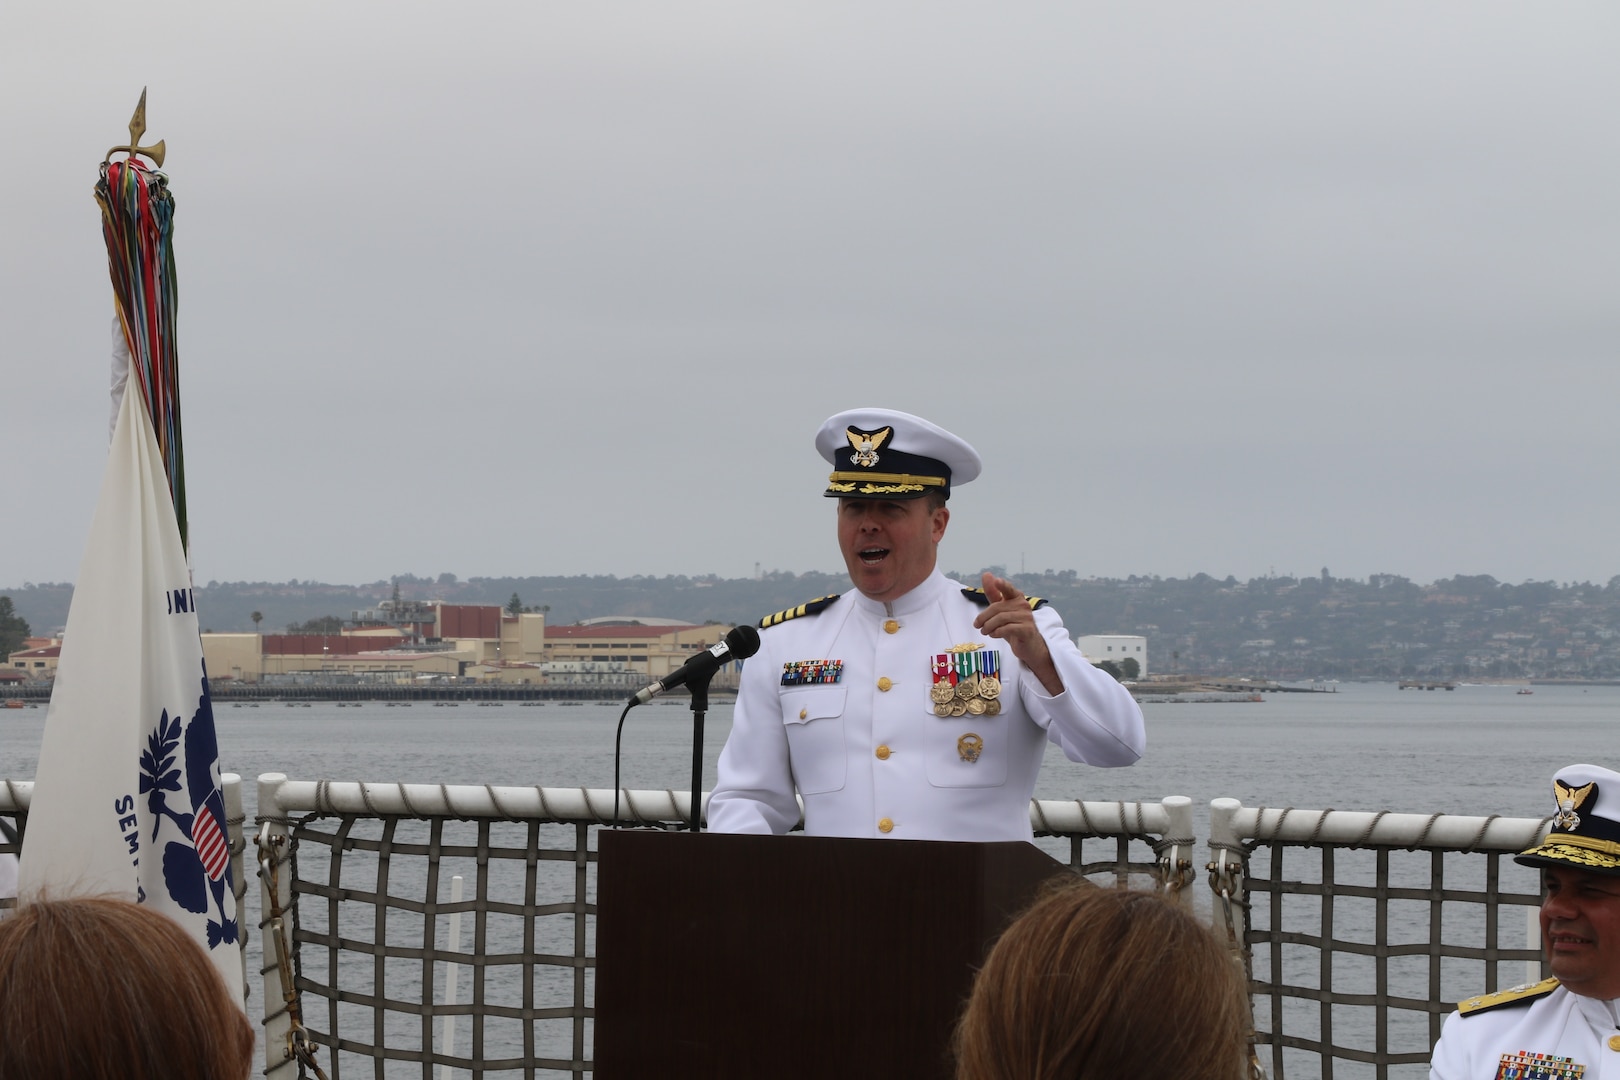 Capt. James O’Mara delivers his remarks during the U.S. Coast Guard Cutter Munro’s (WMSL 755) change of command ceremony in San Diego, May 30, 2024. Vice Adm. Andrew J. Tiongson, Commander, U.S. Coast Guard Pacific Area, presided over the ceremony in which O’Mara relieved Capt. Rula Deisher as Munro’s commanding officer. U.S. Coast Guard photo by Ensign Samika Lewis.